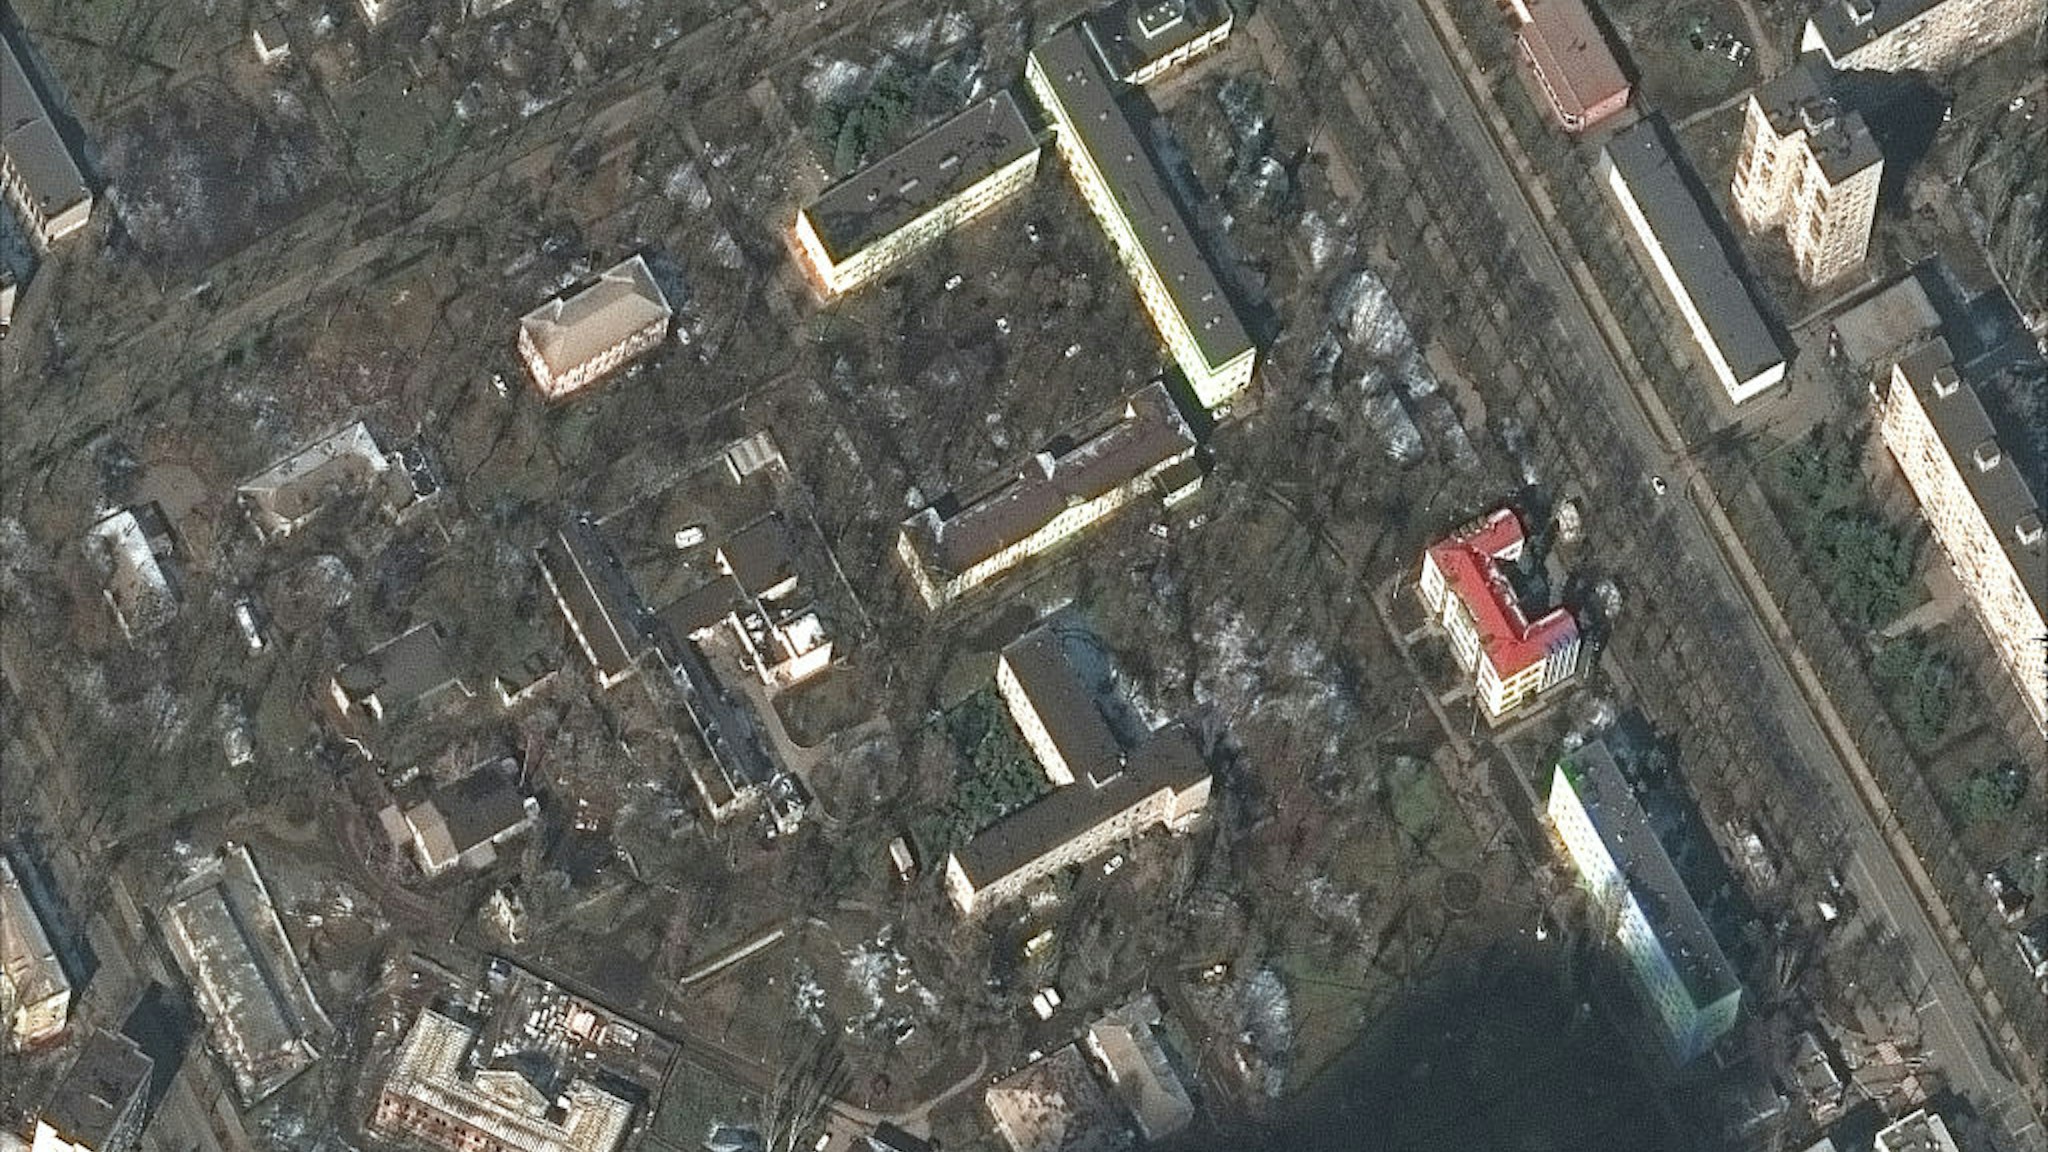 RUSSIANS INVADE UKRAINE -- MARCH 9, 2022: 09 Maxar satellite imagery of Mariupol Childrens Hospital and buildings BEFORE the bombing-- in Mariupol, Ukraine. Imagery was captured before the building was bombed. 9mar2022_wv3. Please use: Satellite image (c) 2022 Maxar Technologies.